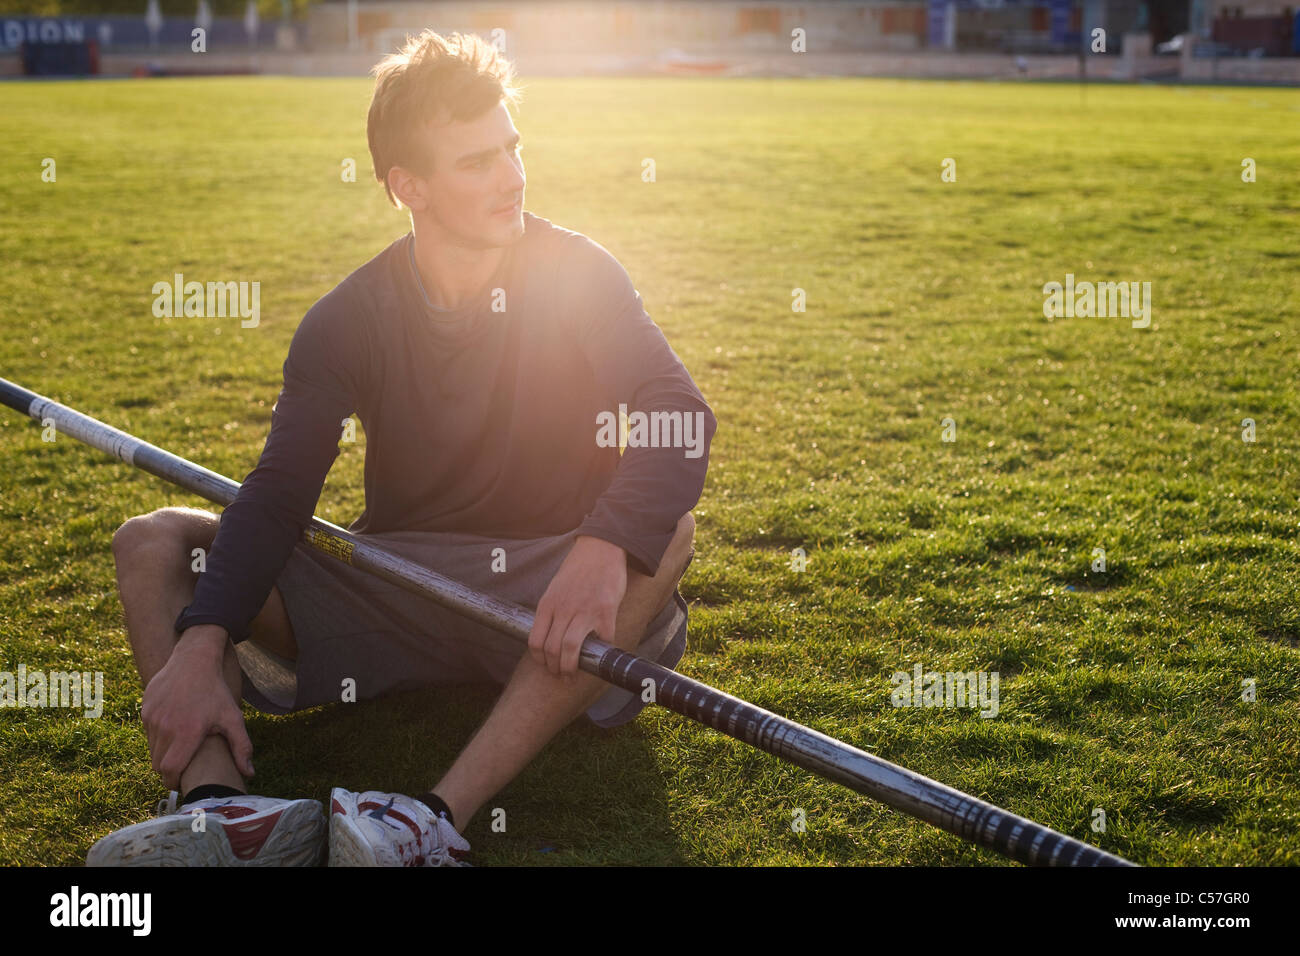 Man sitting with pole on grass Stock Photo